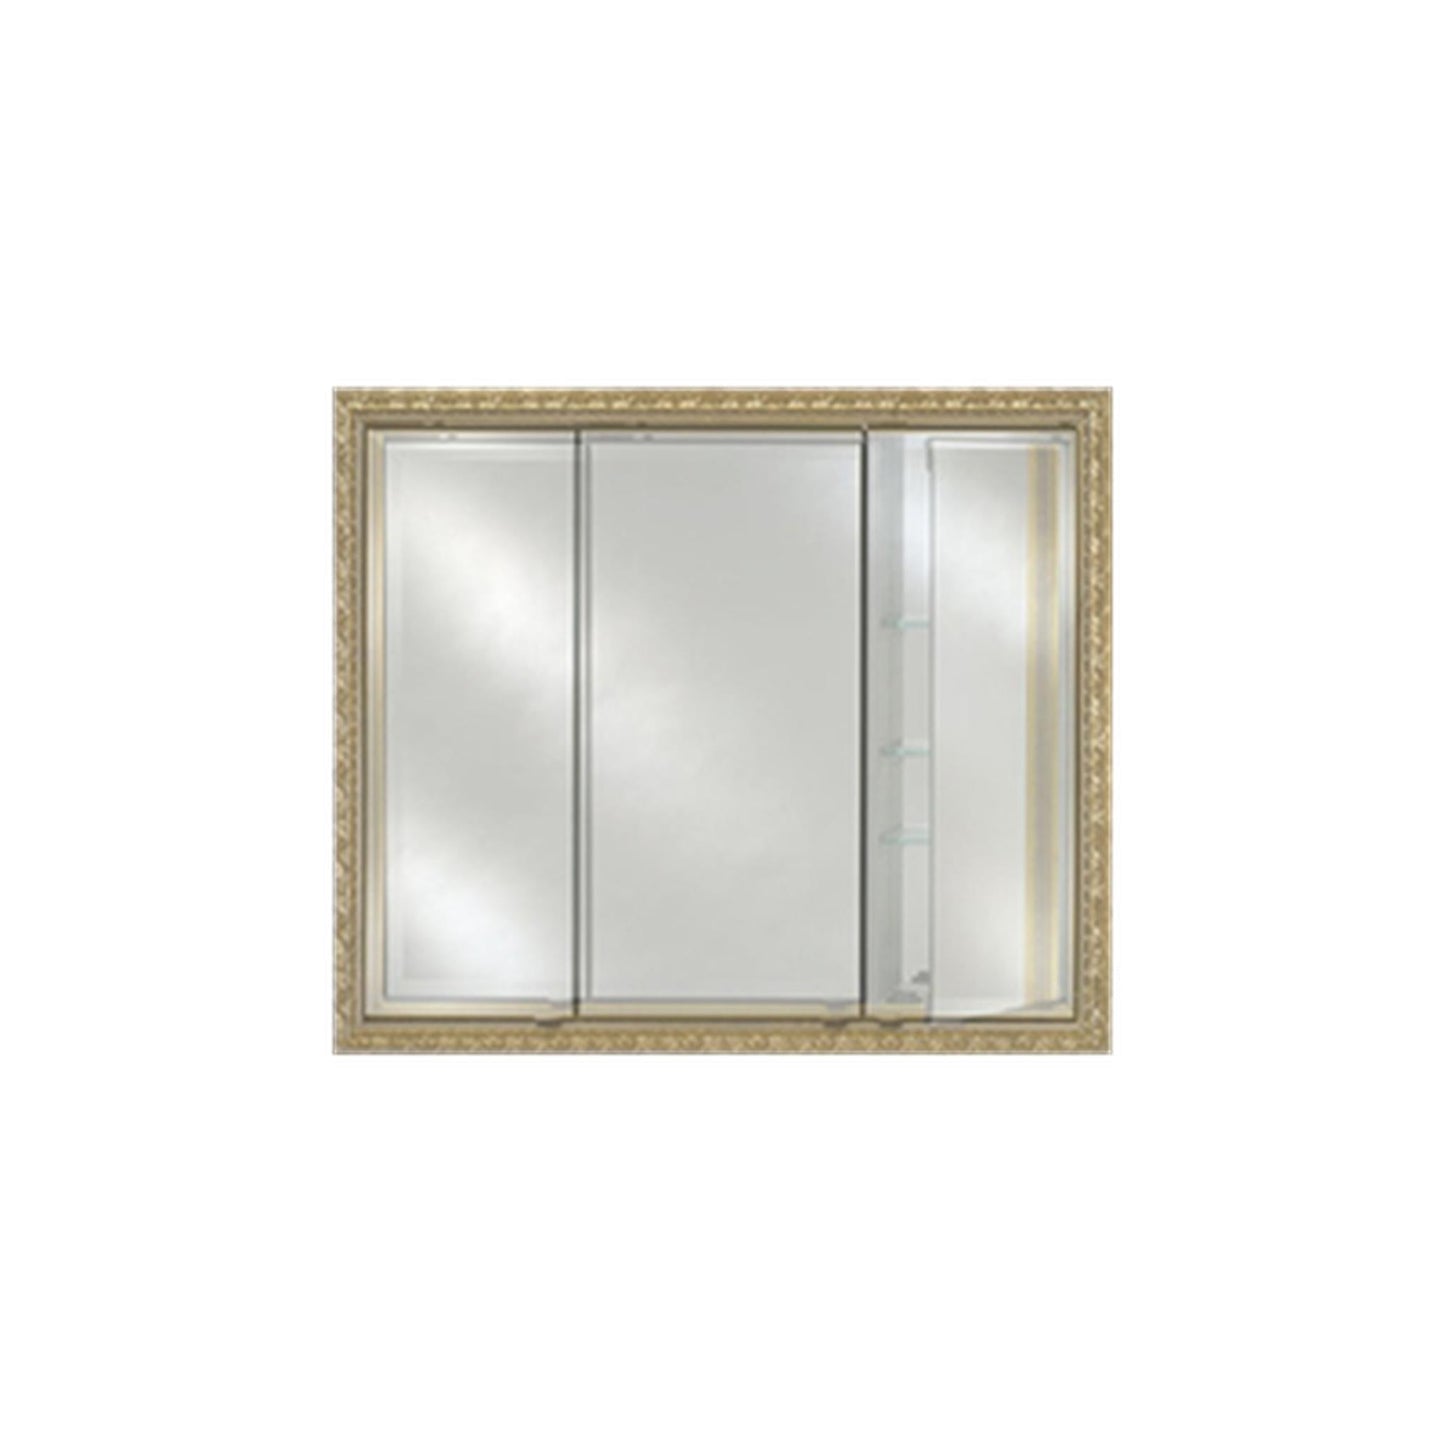 Afina Signature 47" x 36" Polished Glimmer-Scallop Recessed Triple Door Medicine Cabinet With Beveled Edge Mirror